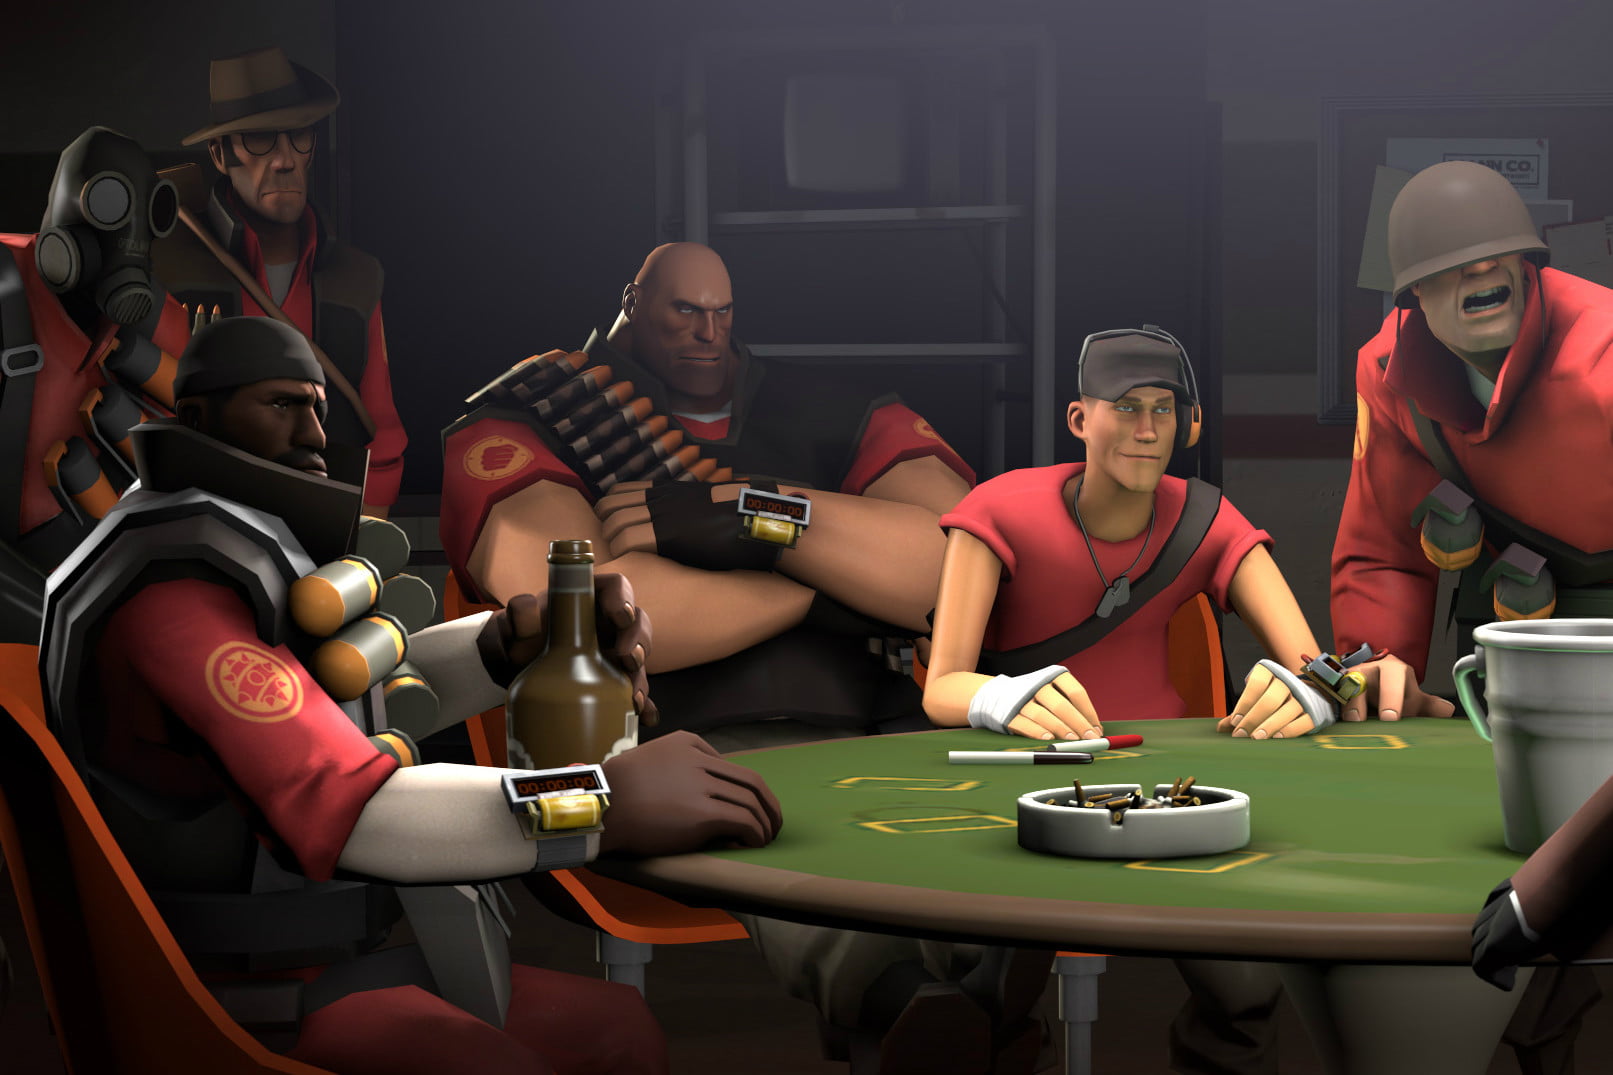 Team fortress 2 for mac